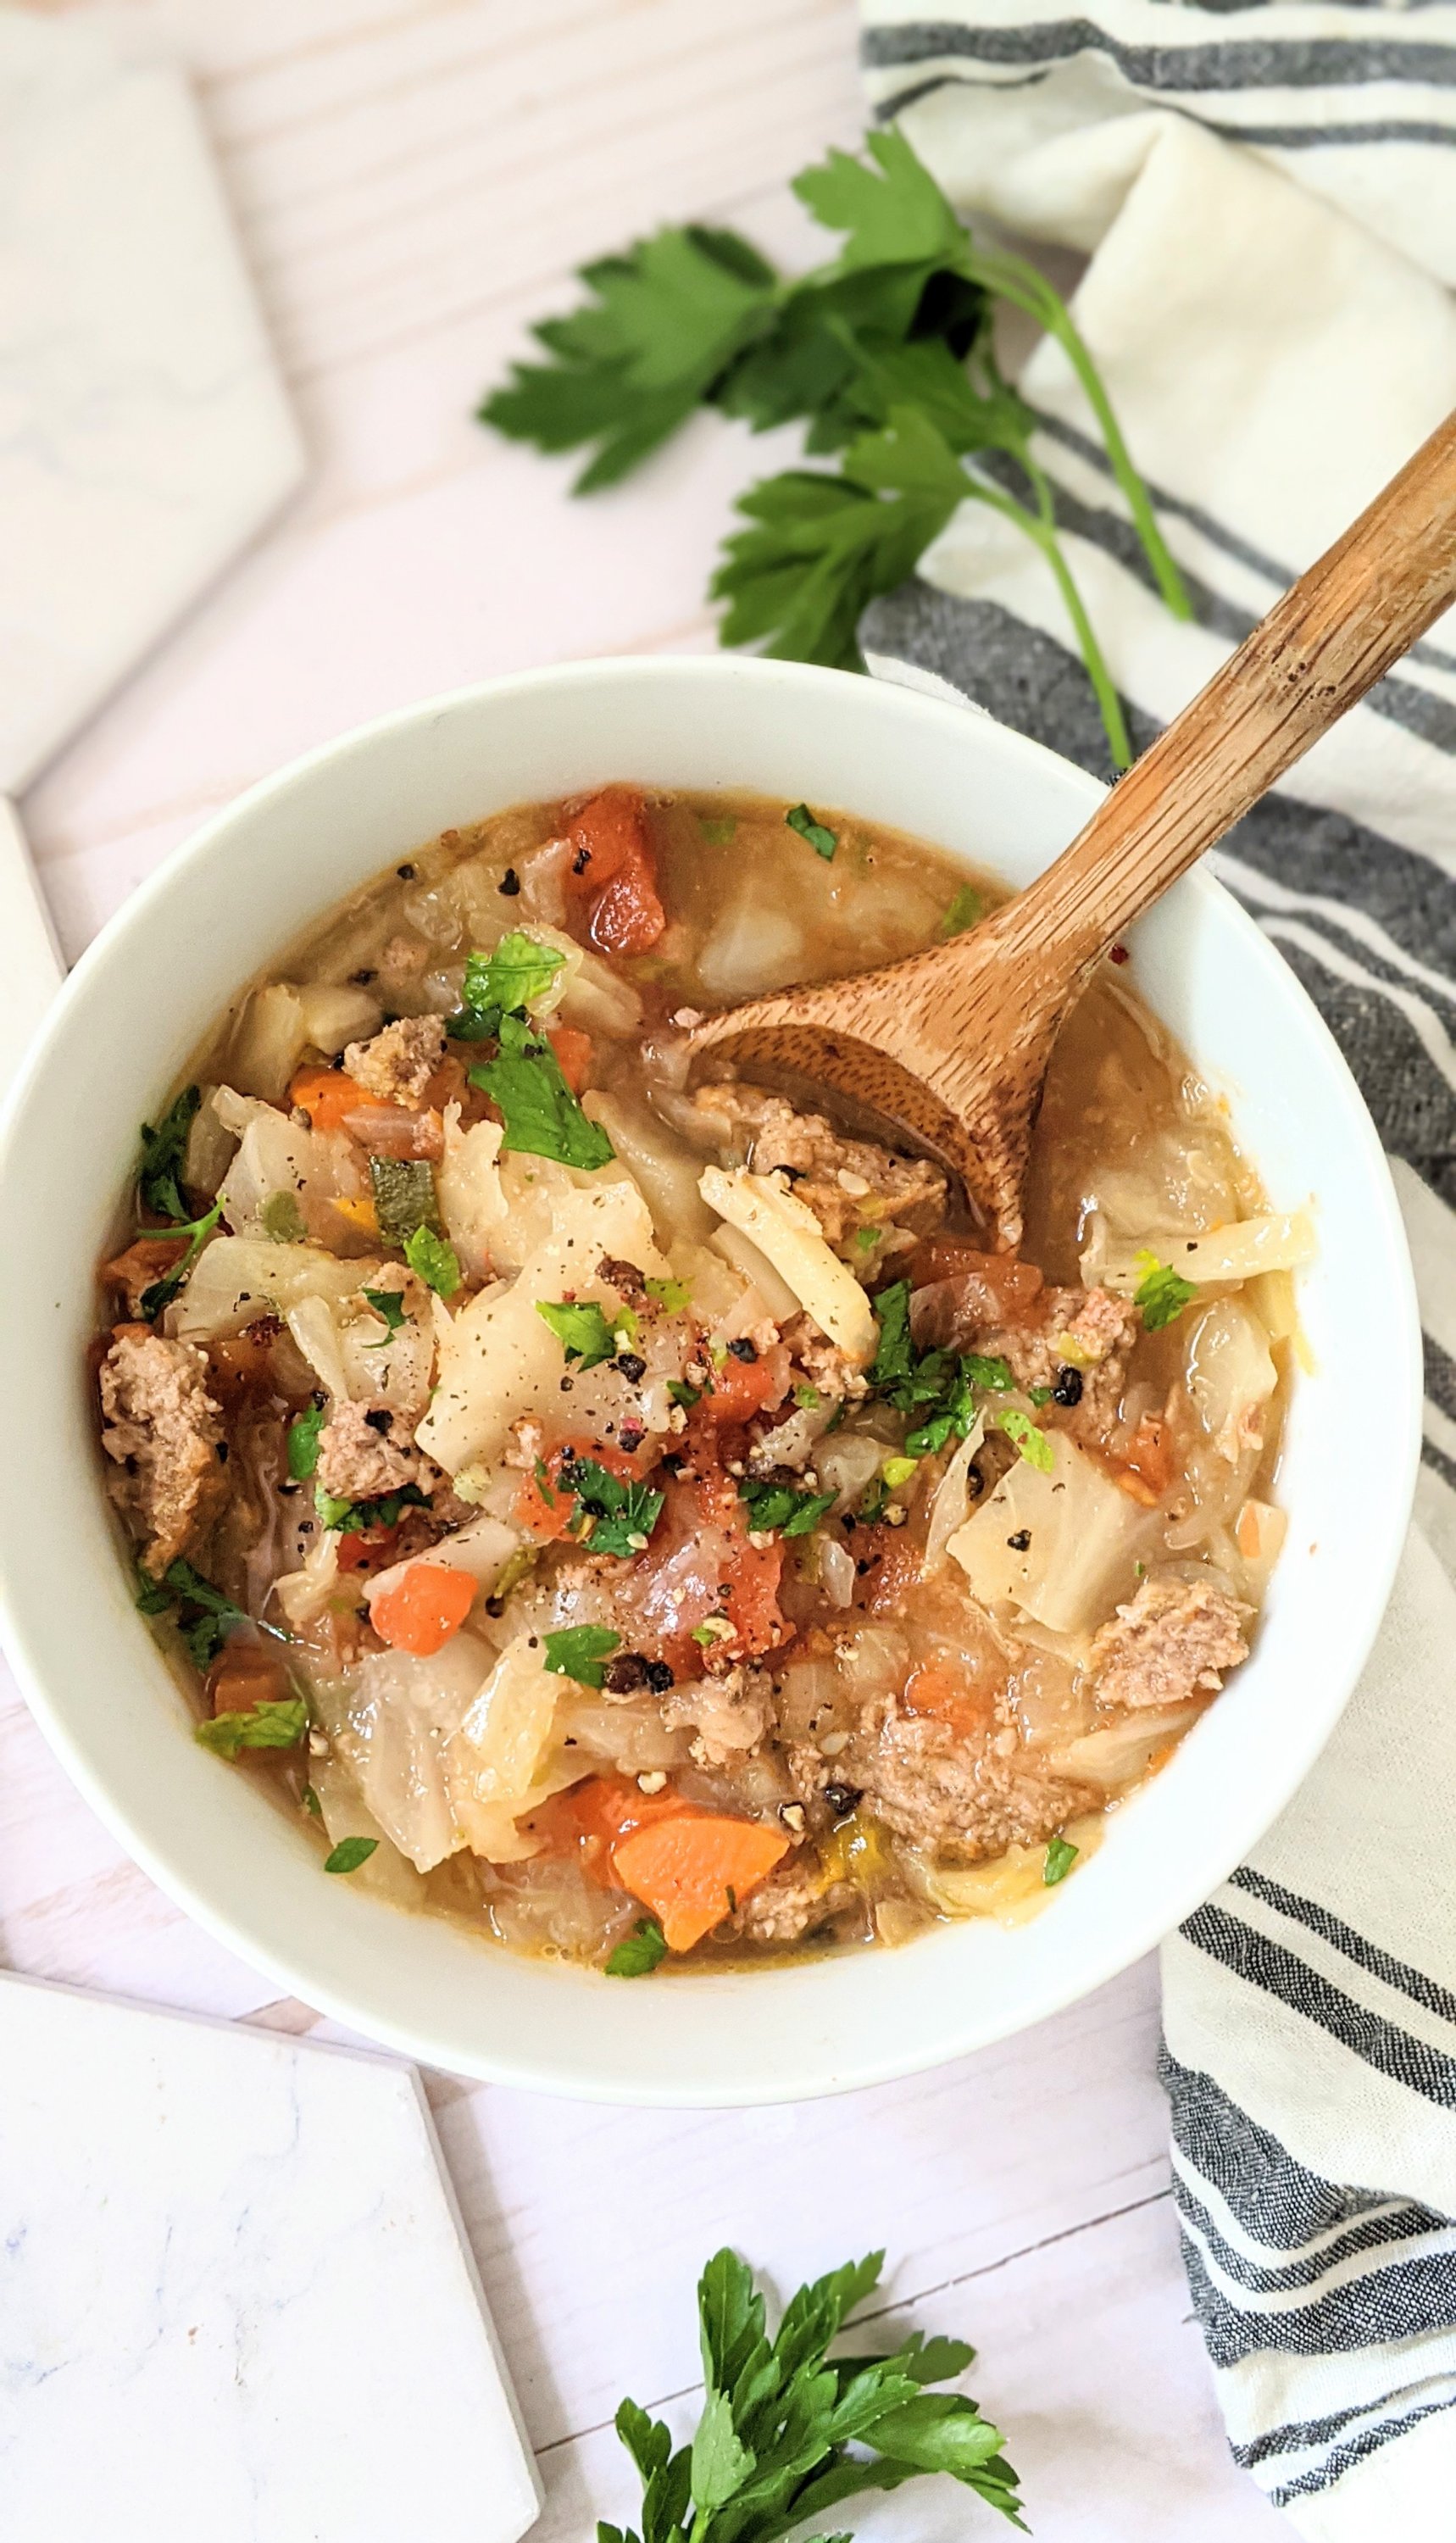 low carb turkey instnat pot soup recipe gluten free pressure cooker turkey and cabbage soups dairy free dinner recipes with leftover thanksgiving turkey